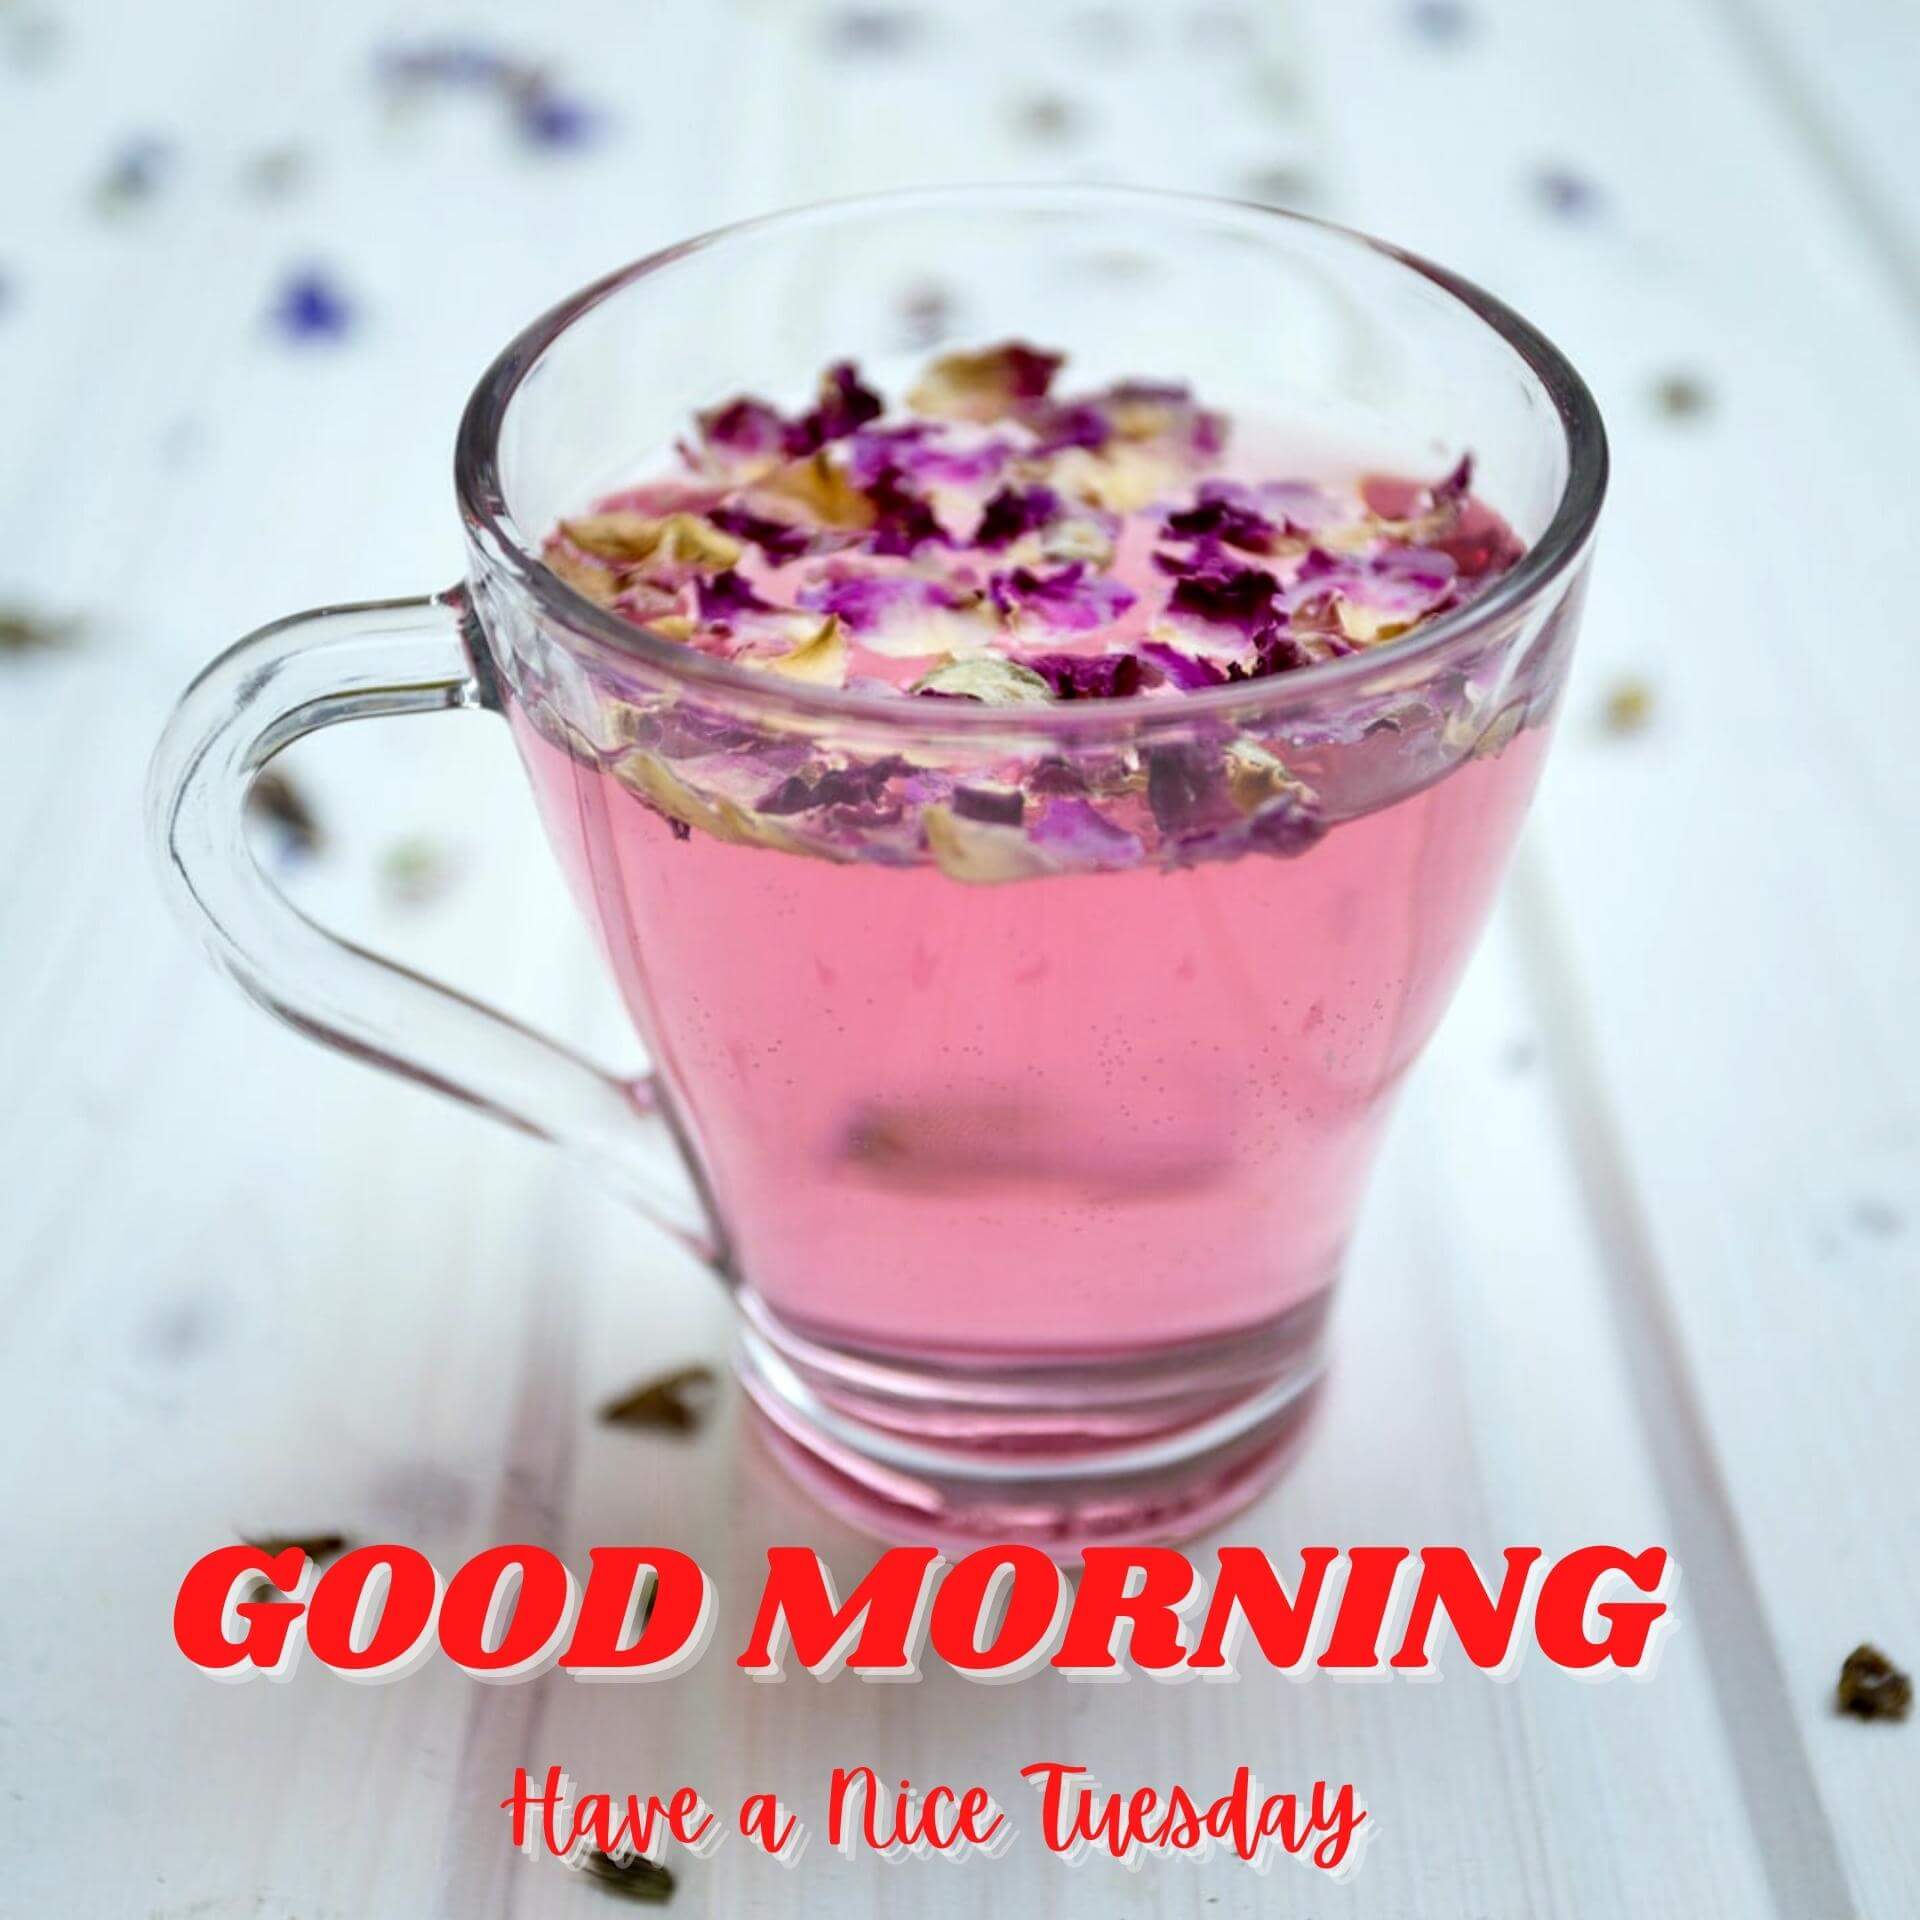 Tuesday good morning Wallpaper HD For Friend